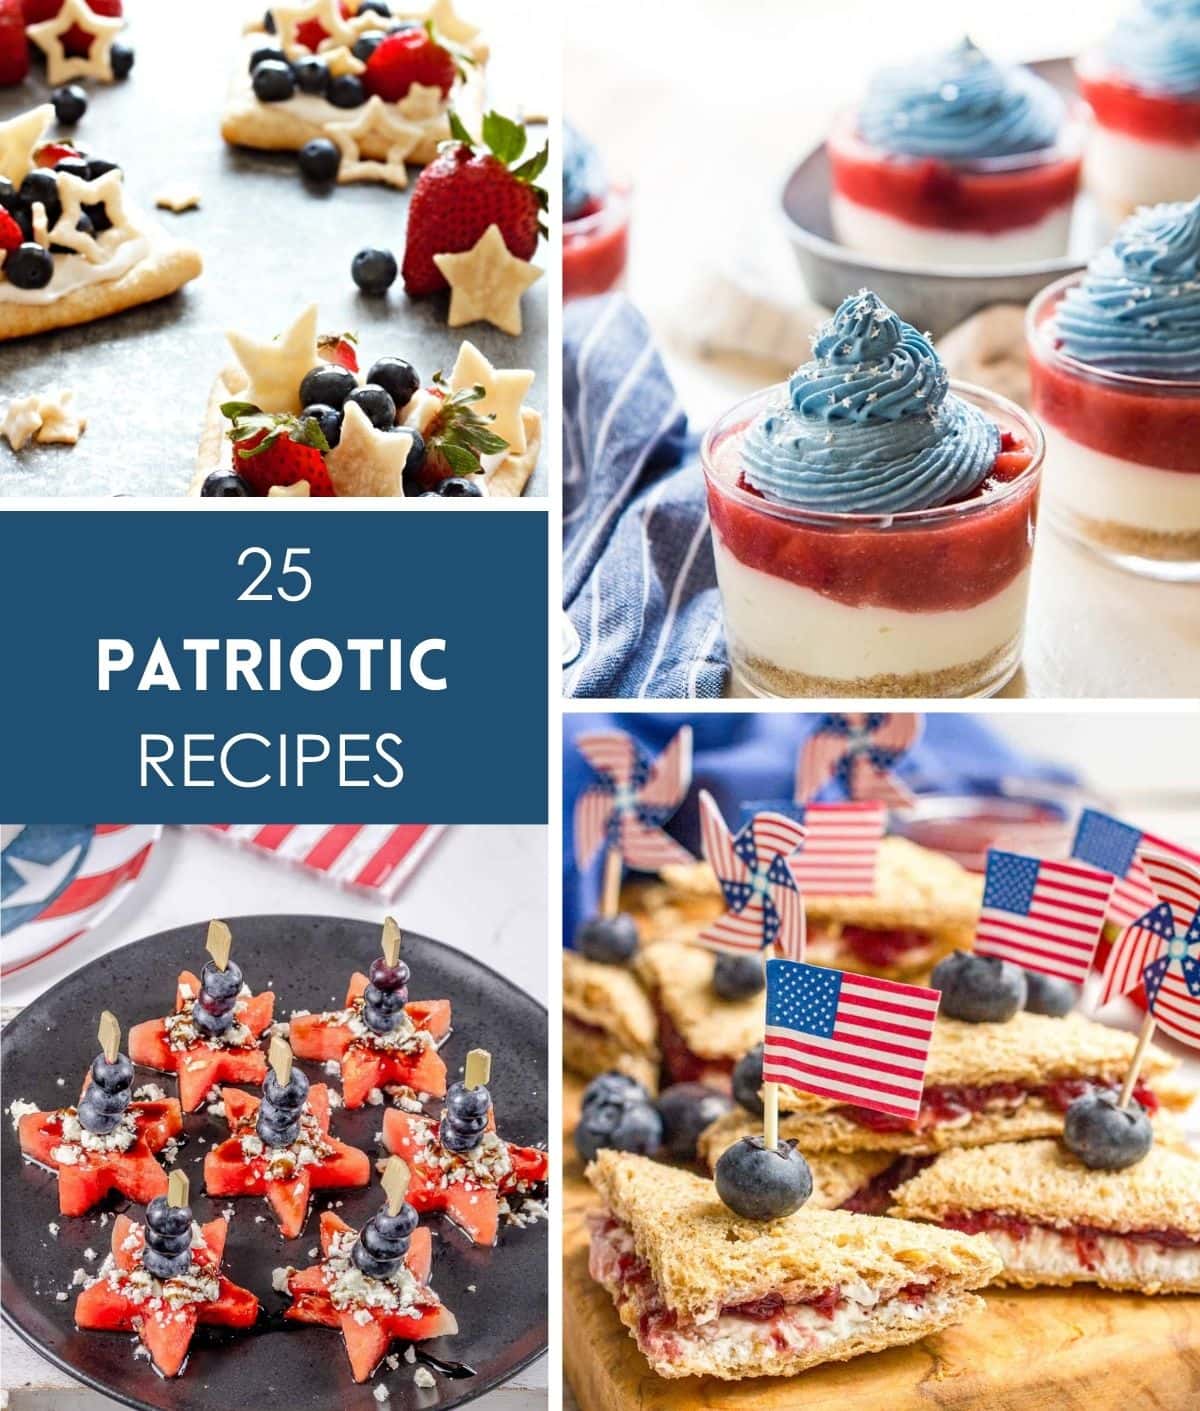 25 Patriotic Recipes To Celebrate The 4th of July